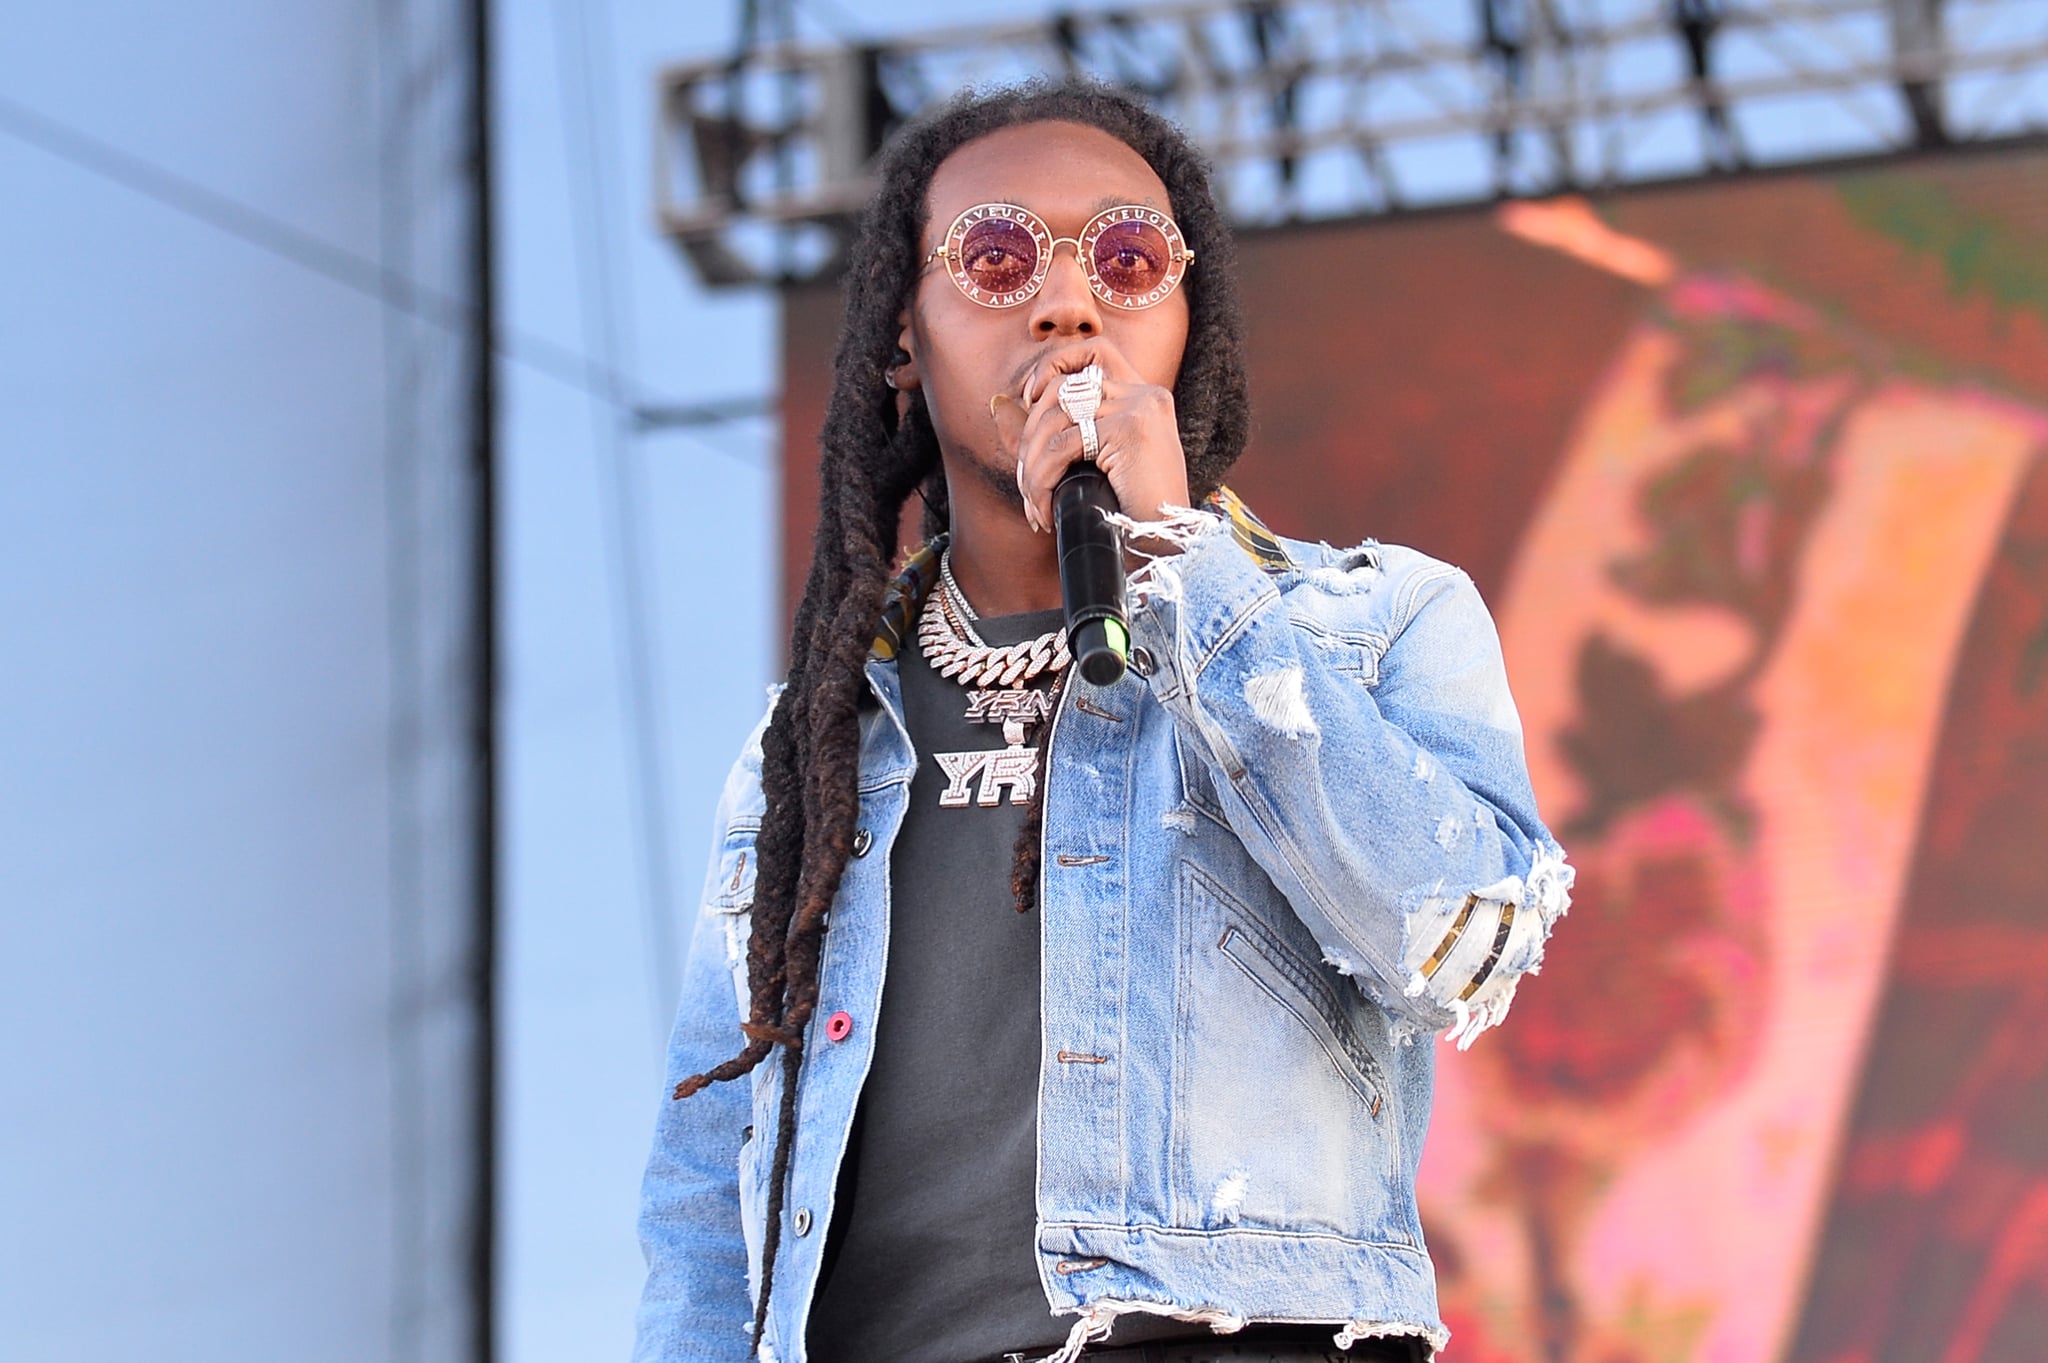 LAS VEGAS, NV - SEPTEMBER 23: Takeoff of Migos performs onstage during Daytime Village Presented By Capital One at the 2017 HeartRadio Music Festival at Las Vegas Village on September 23, 2017 in Las Vegas, Nevada.  (Photo by Bryan Steffy/Getty Images for iHeartMedia)